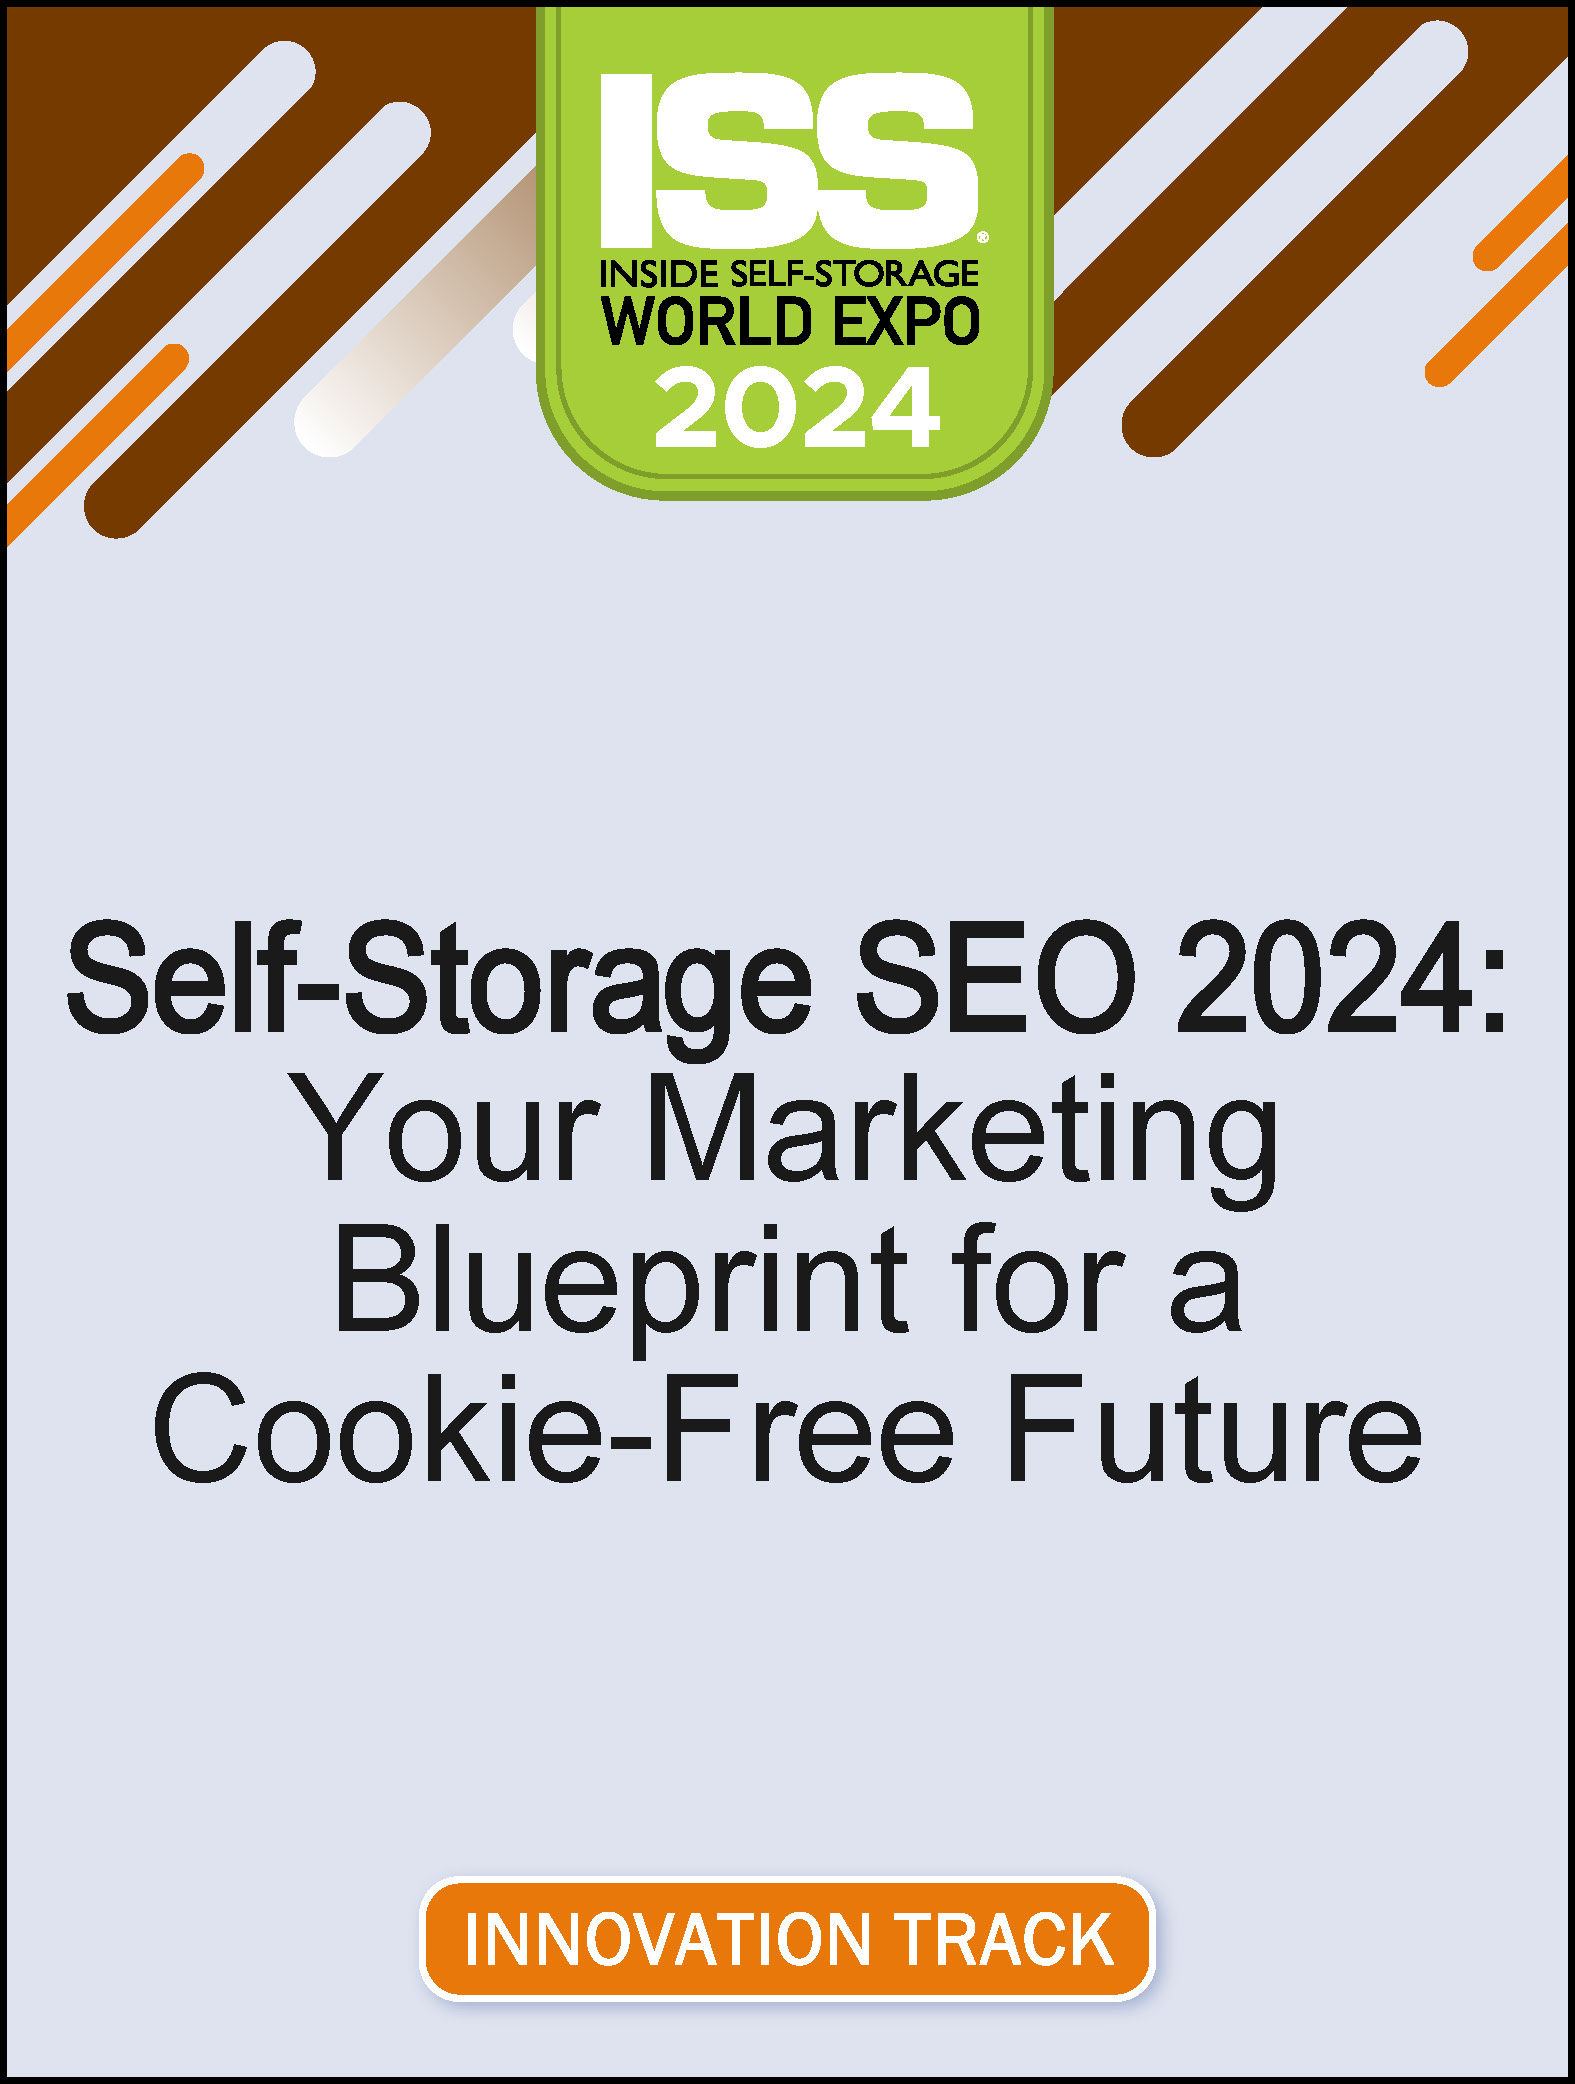 Video Pre-Order Sub - Self-Storage SEO 2024: Your Marketing Blueprint for a Cookie-Free Future